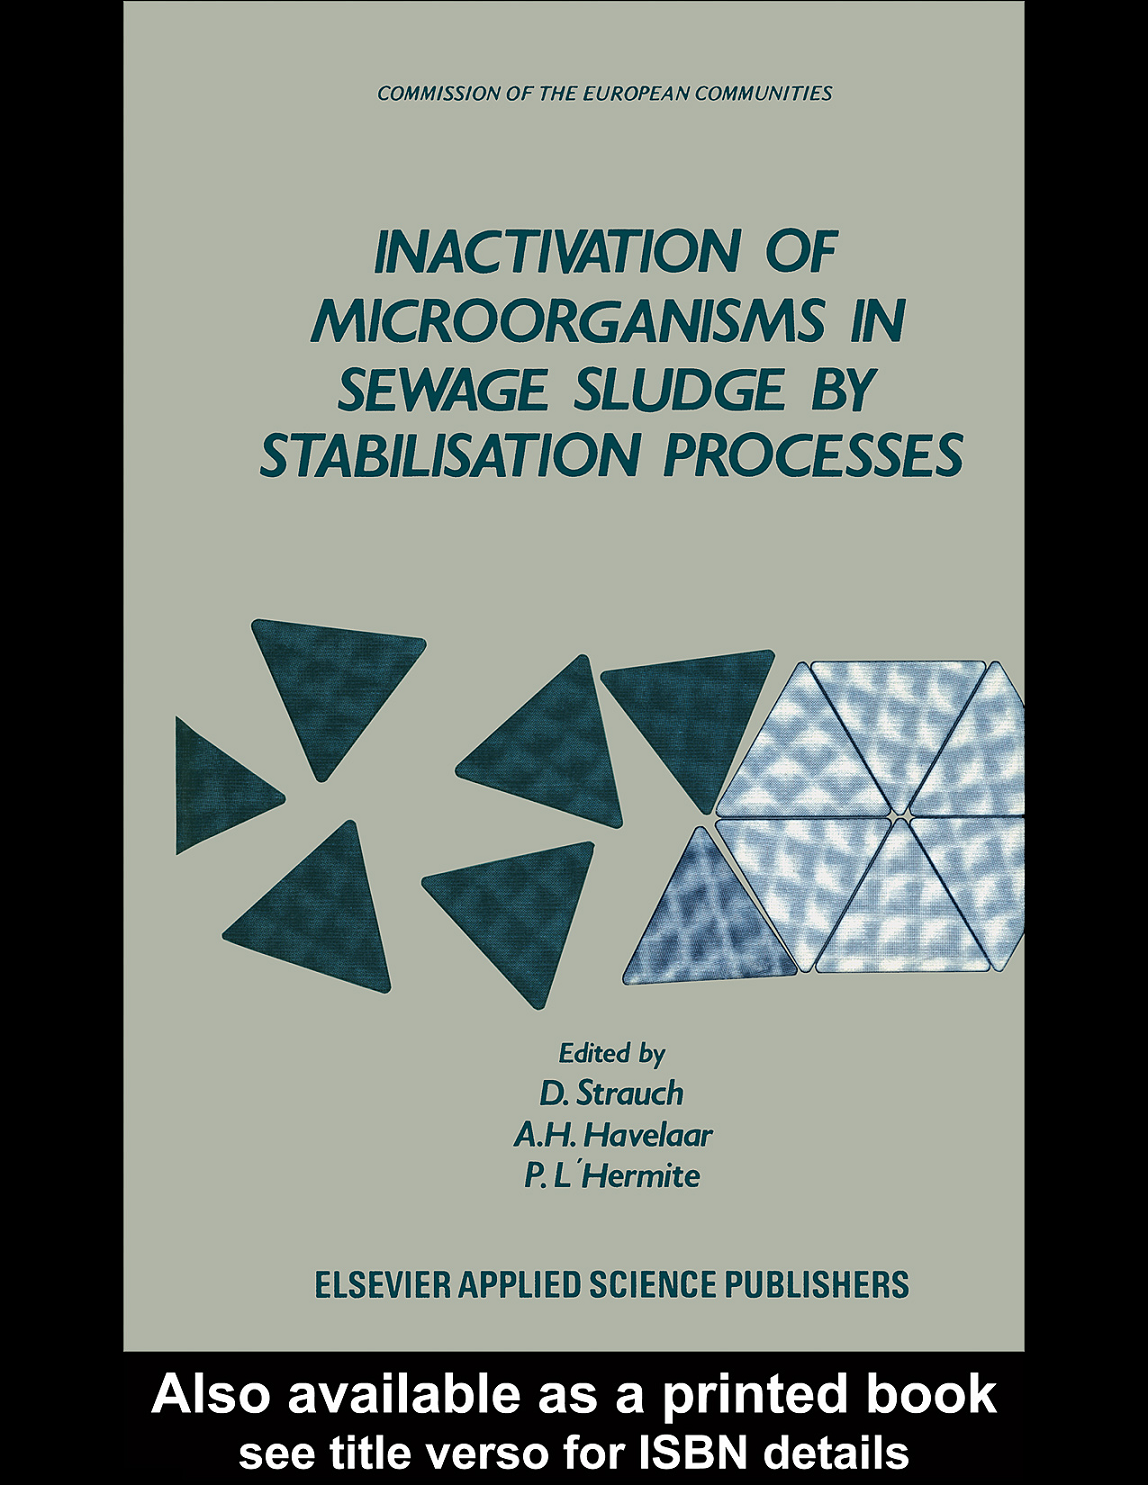 Inactivation of Microorganisms in Sewage Sludge by Stabilization Processes